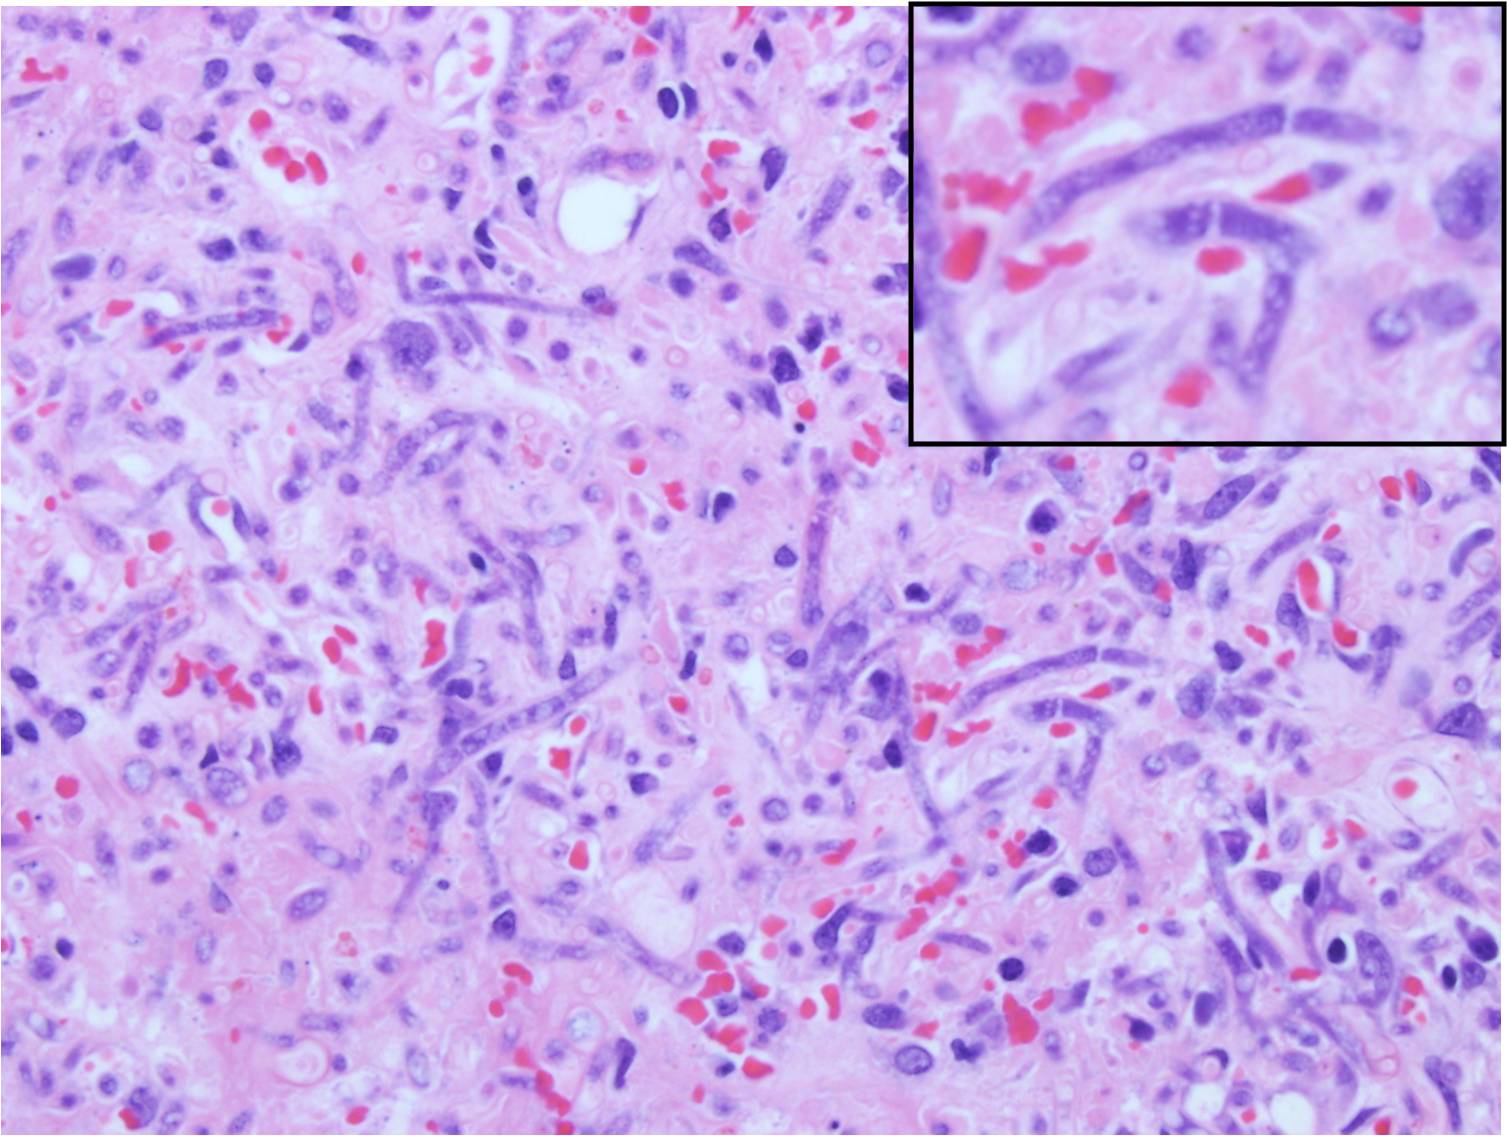 Hemotoxylin and Eosin stain histopathology showing necrotic and edematous tissue with neutrophilic inflitrate and hyphae